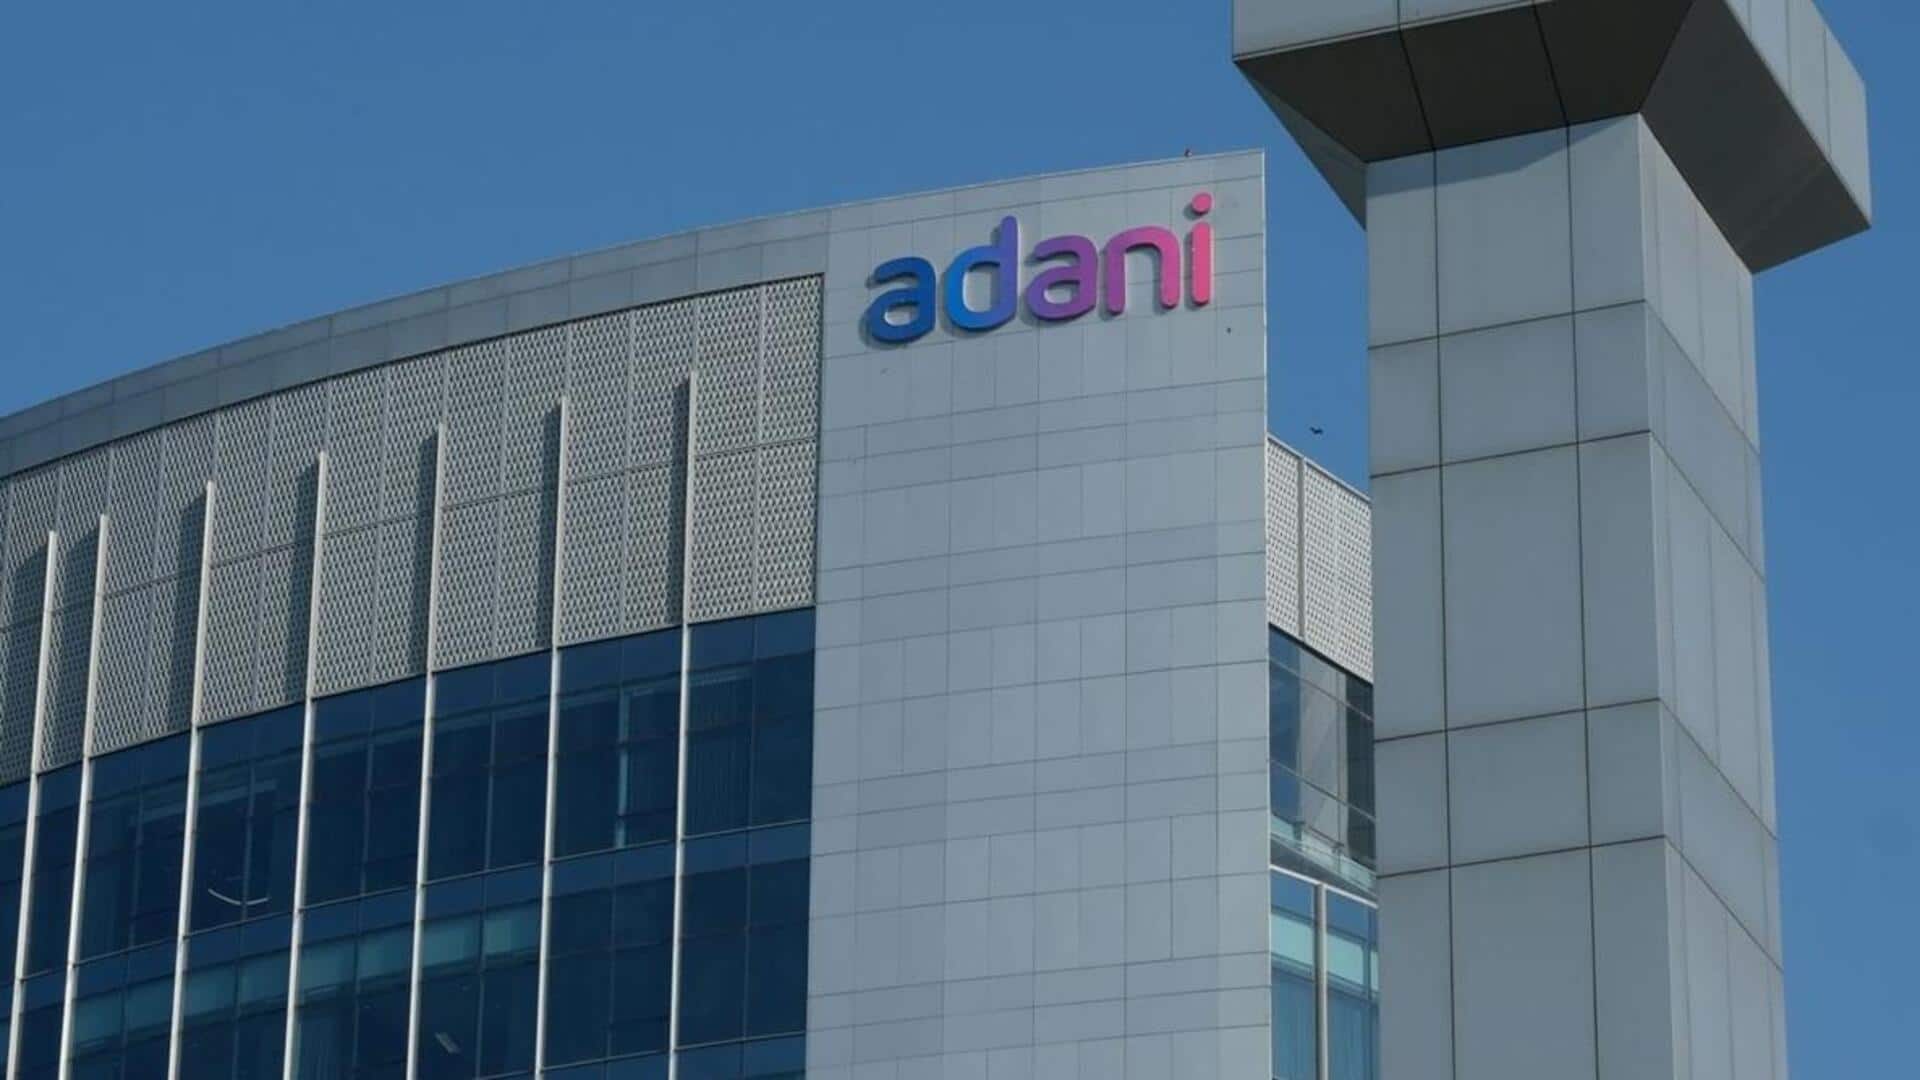 Adani Energy Q2 profit grows 46% to Rs. 284cr